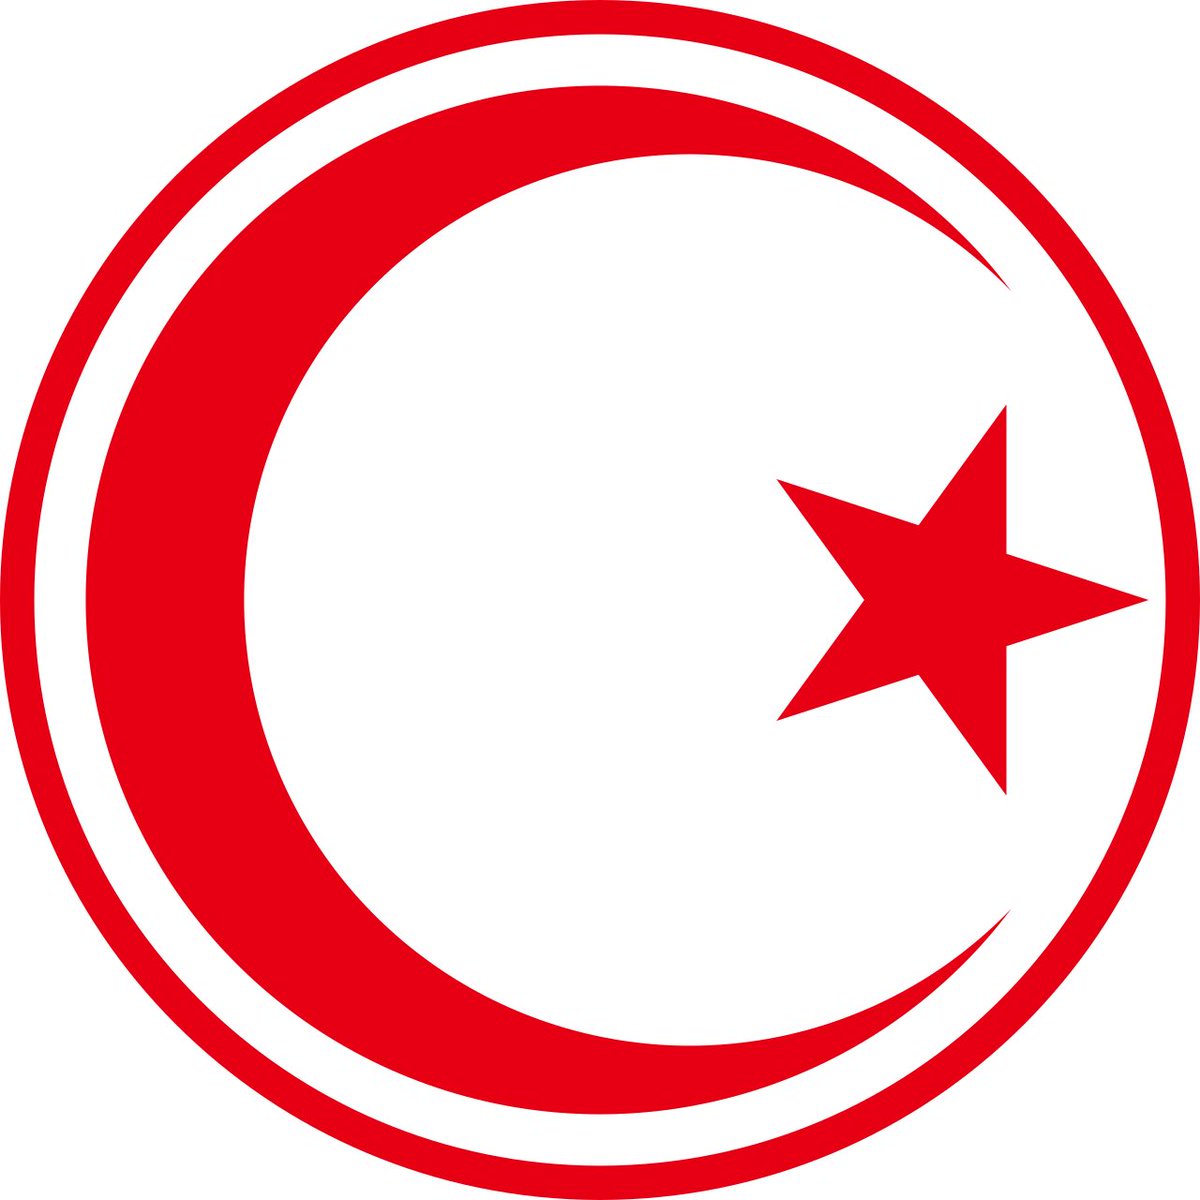 Tunisia: this is all I have ever wanted from every country with a crescent and star on their flag